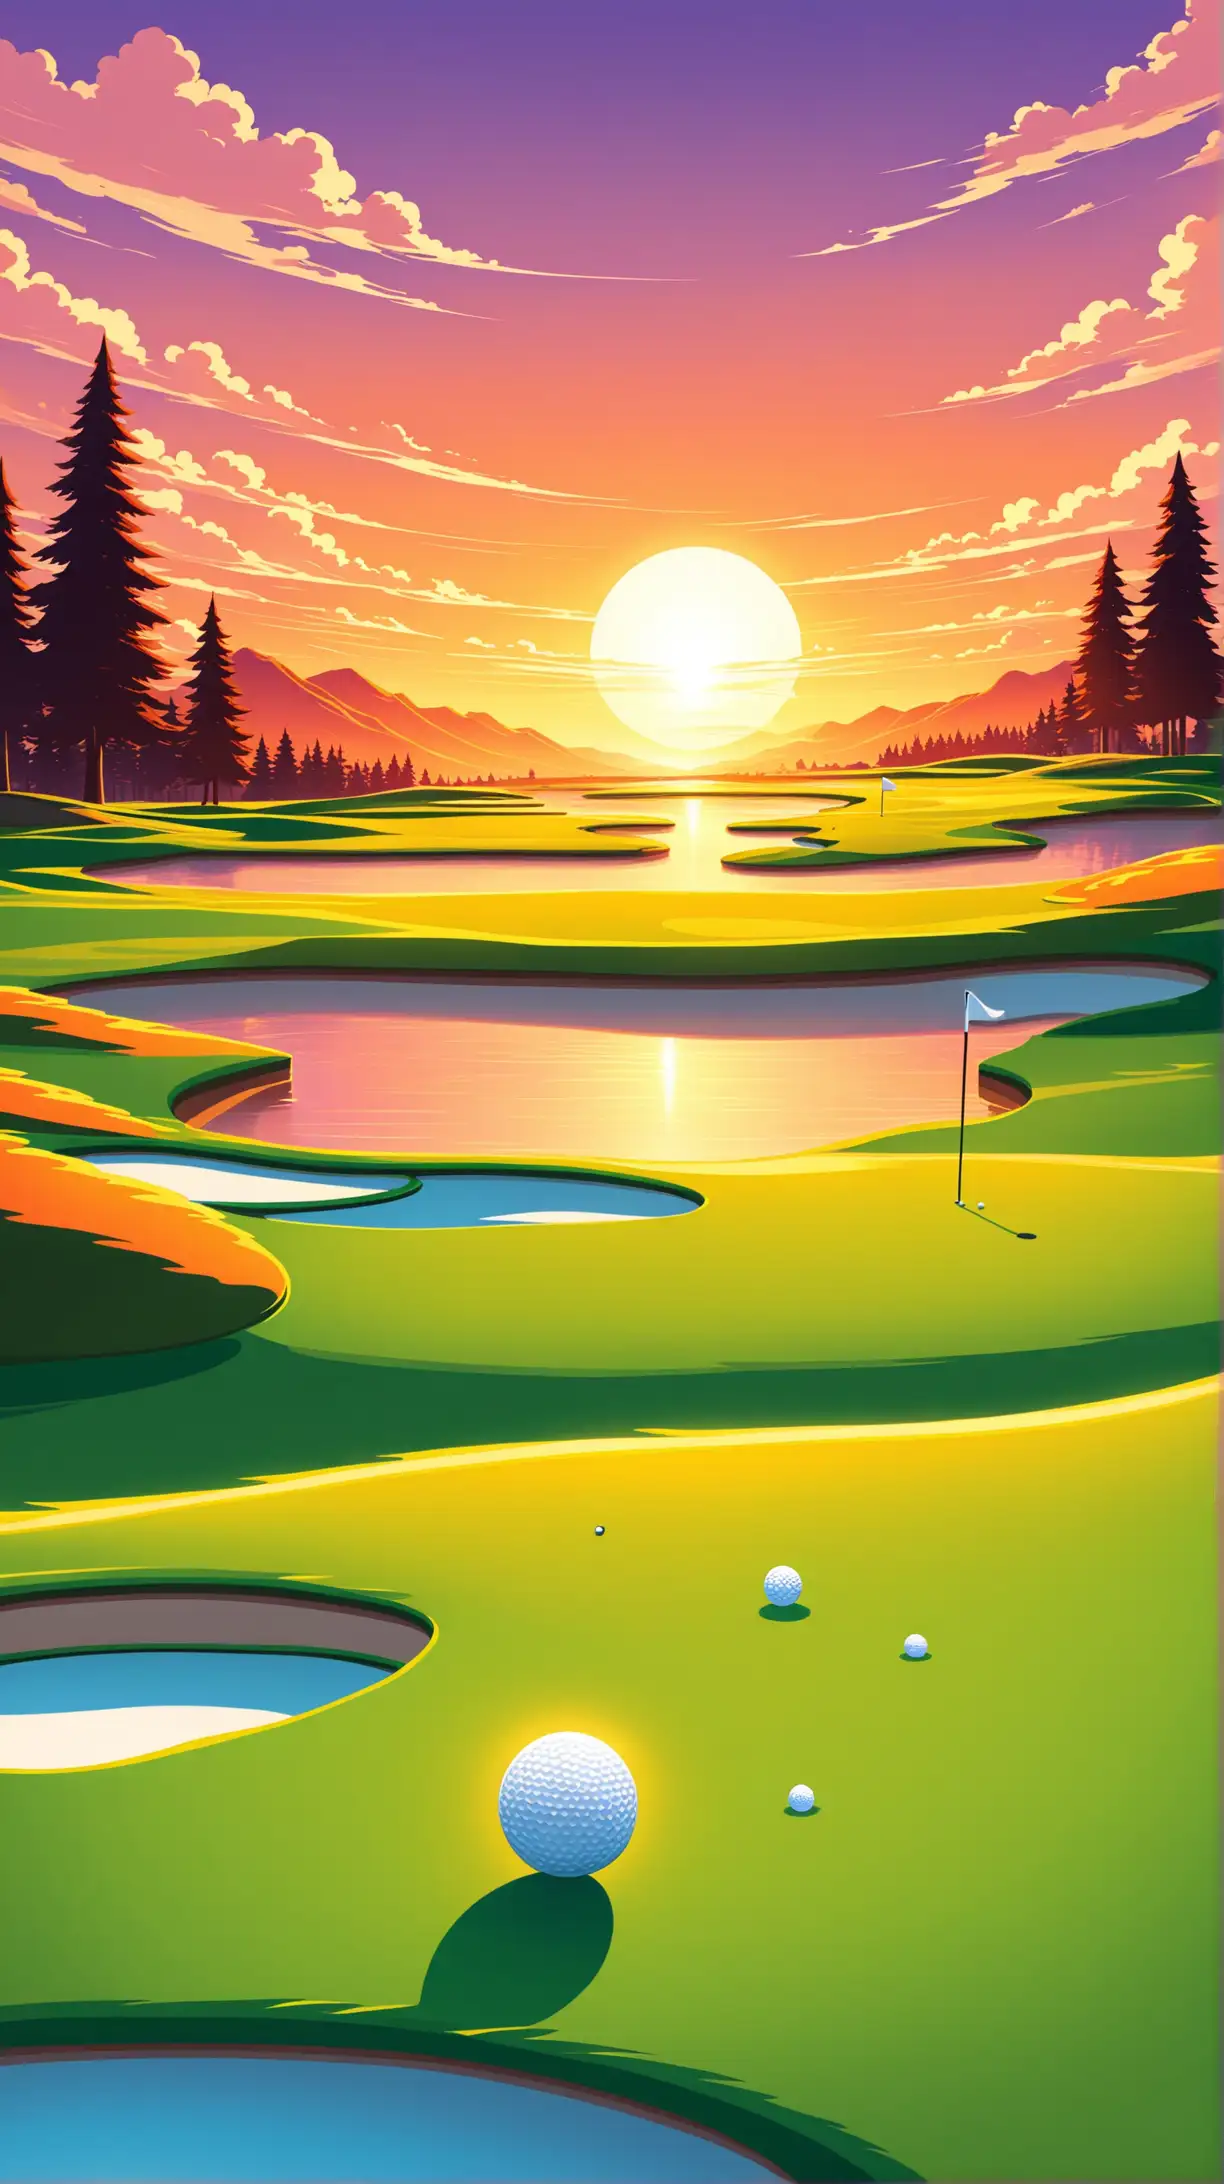 Colorful Cartoon Golf Course at Sunset